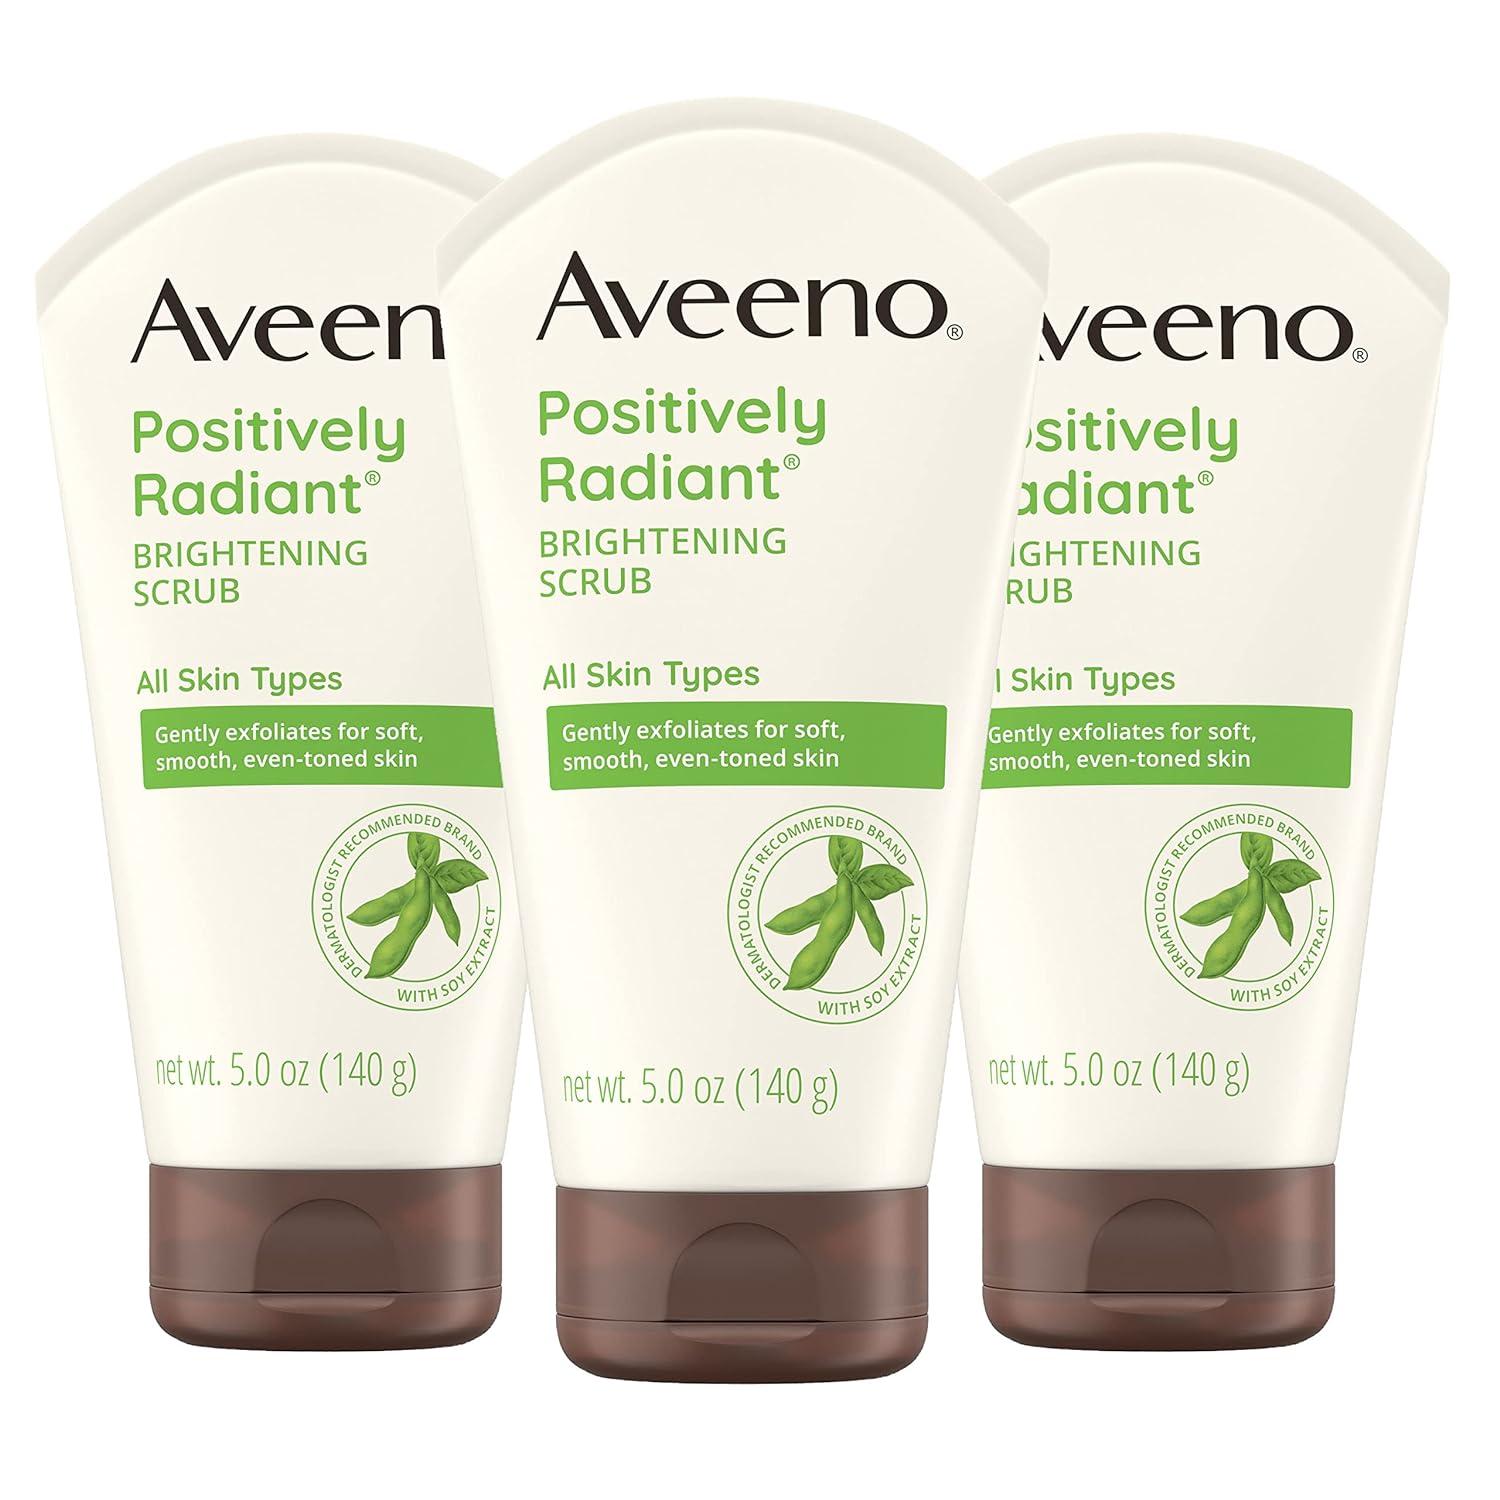 Aveeno Daily Moisturizing Facial Cleanser 3 Pack for $9.32 Shipped